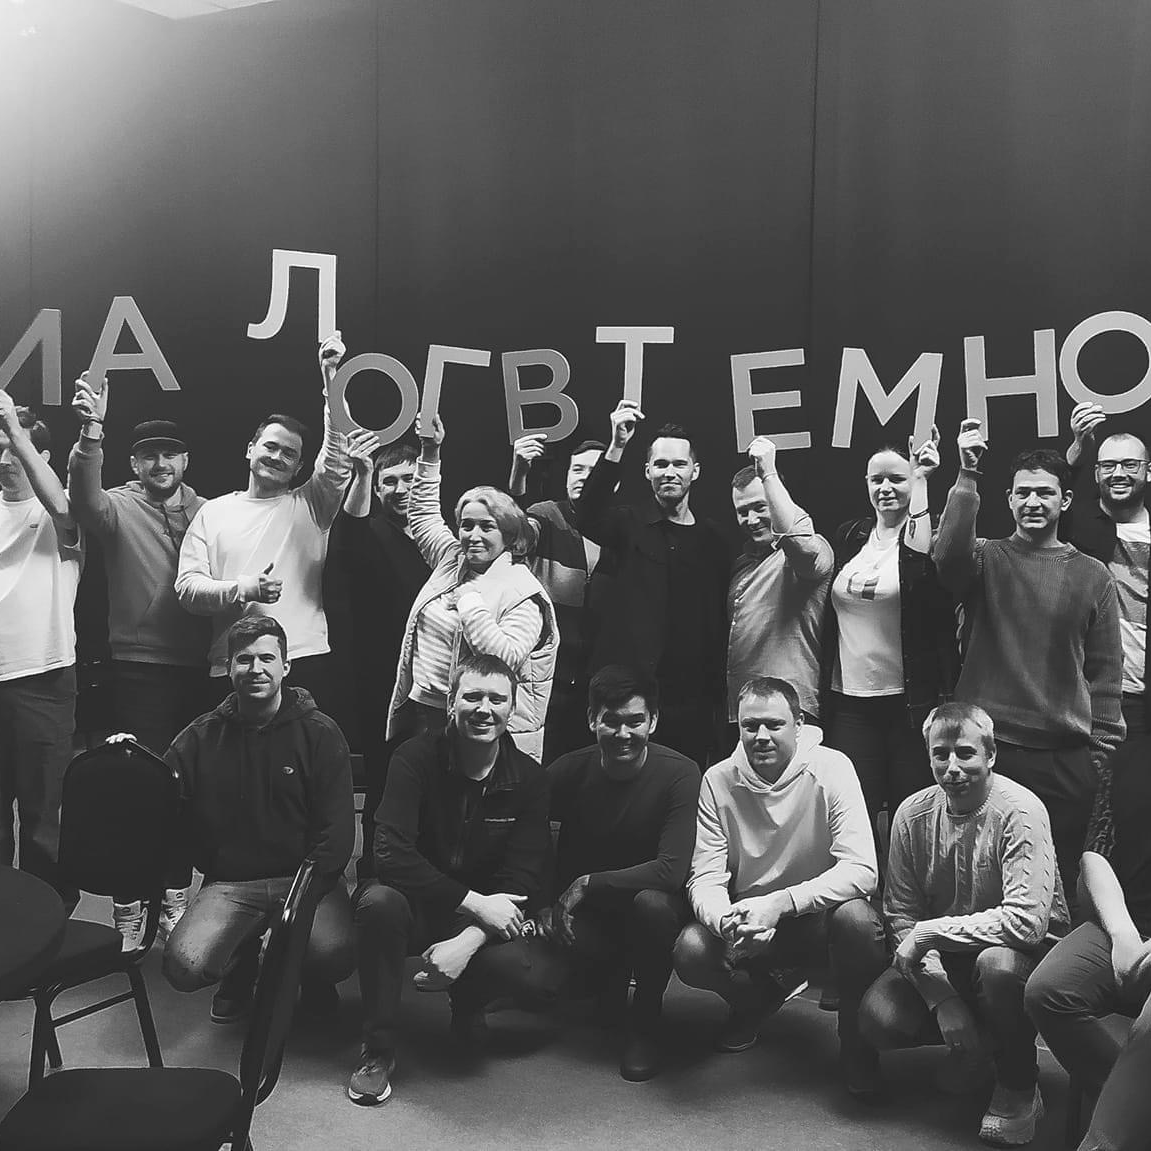 Foto of a the moscow crew holding letters in the air.